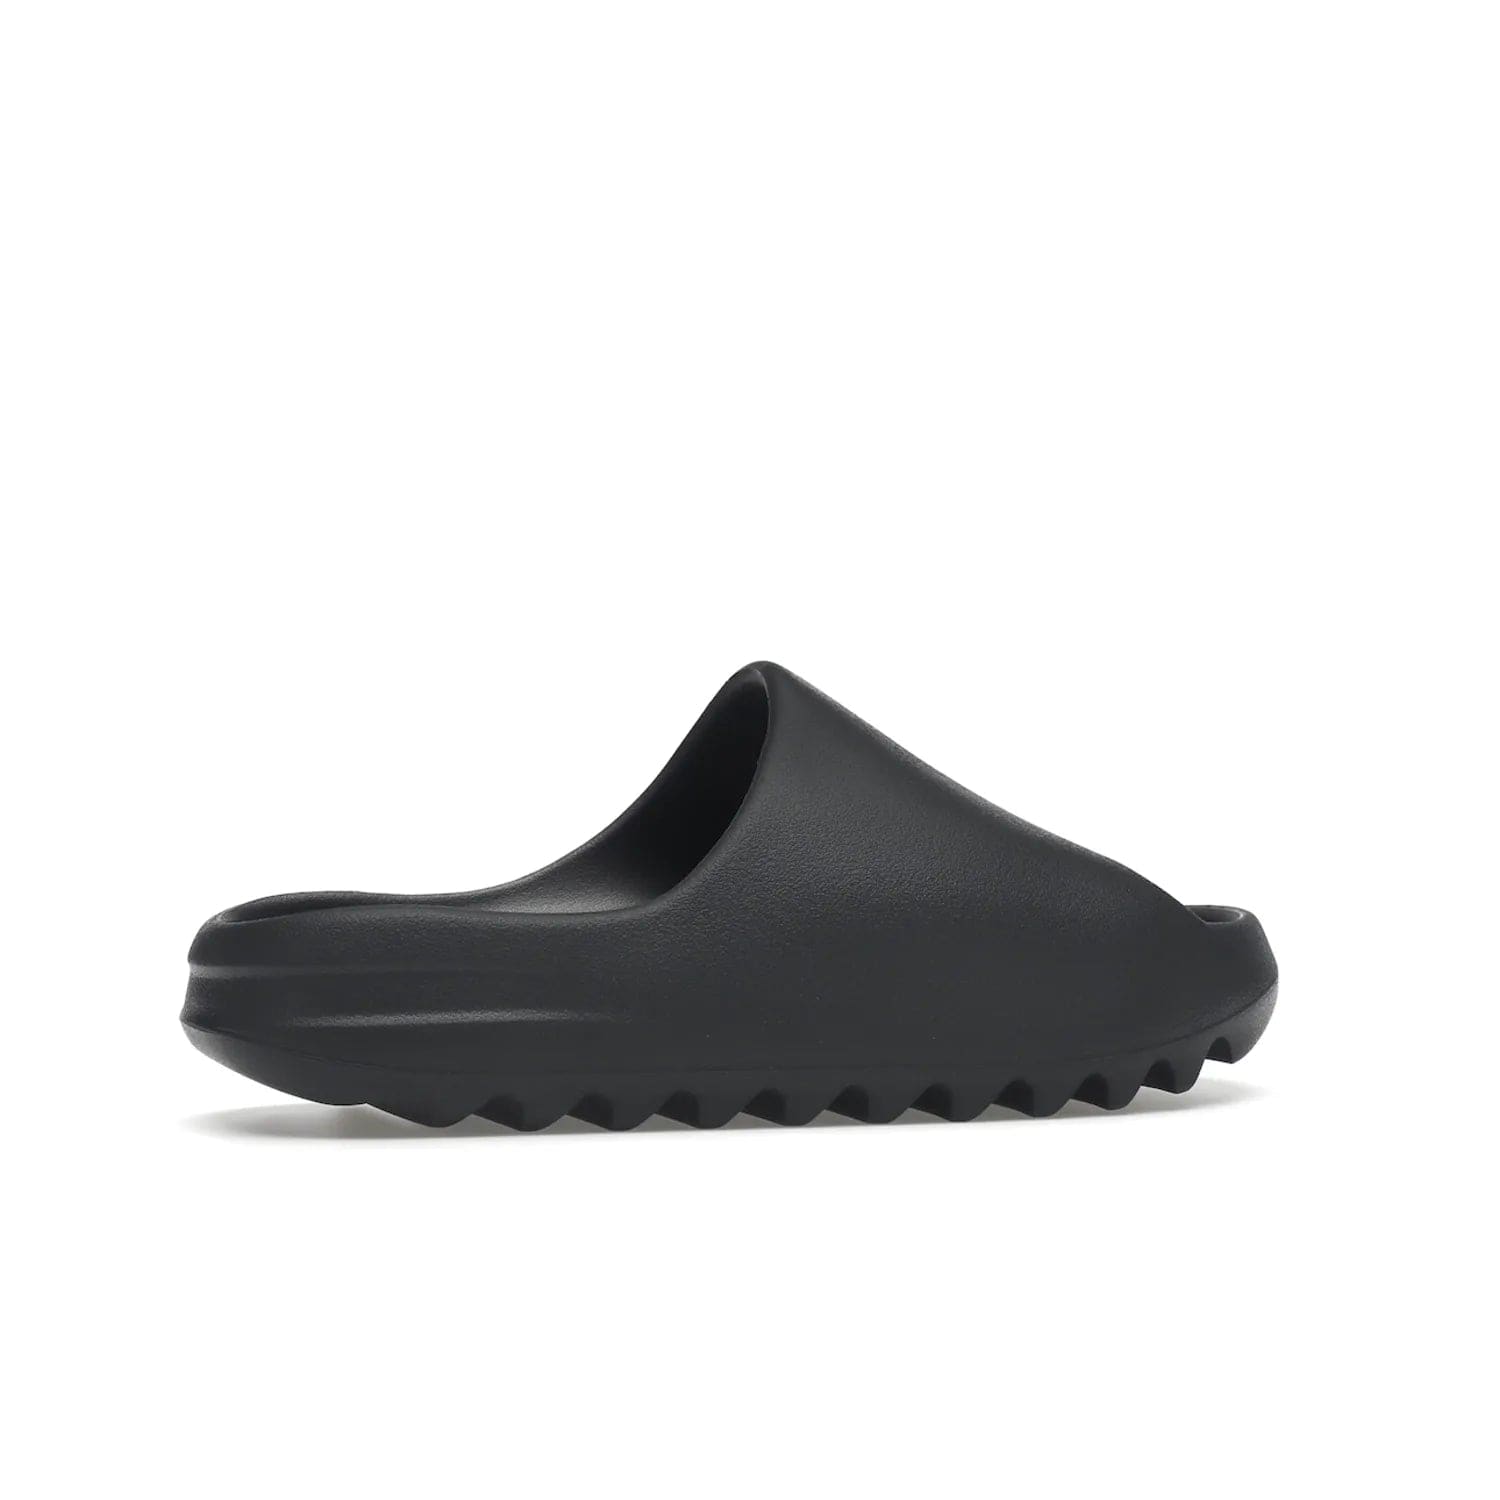 adidas Yeezy Slide Slate Grey - Image 35 - Only at www.BallersClubKickz.com - Stylish & comfortable adidas Yeezy Slide Slate Grey features an EVA foam upper, strategic cutouts, textured outsole pattern, & easy slip-on design for modern comfort & classic style.